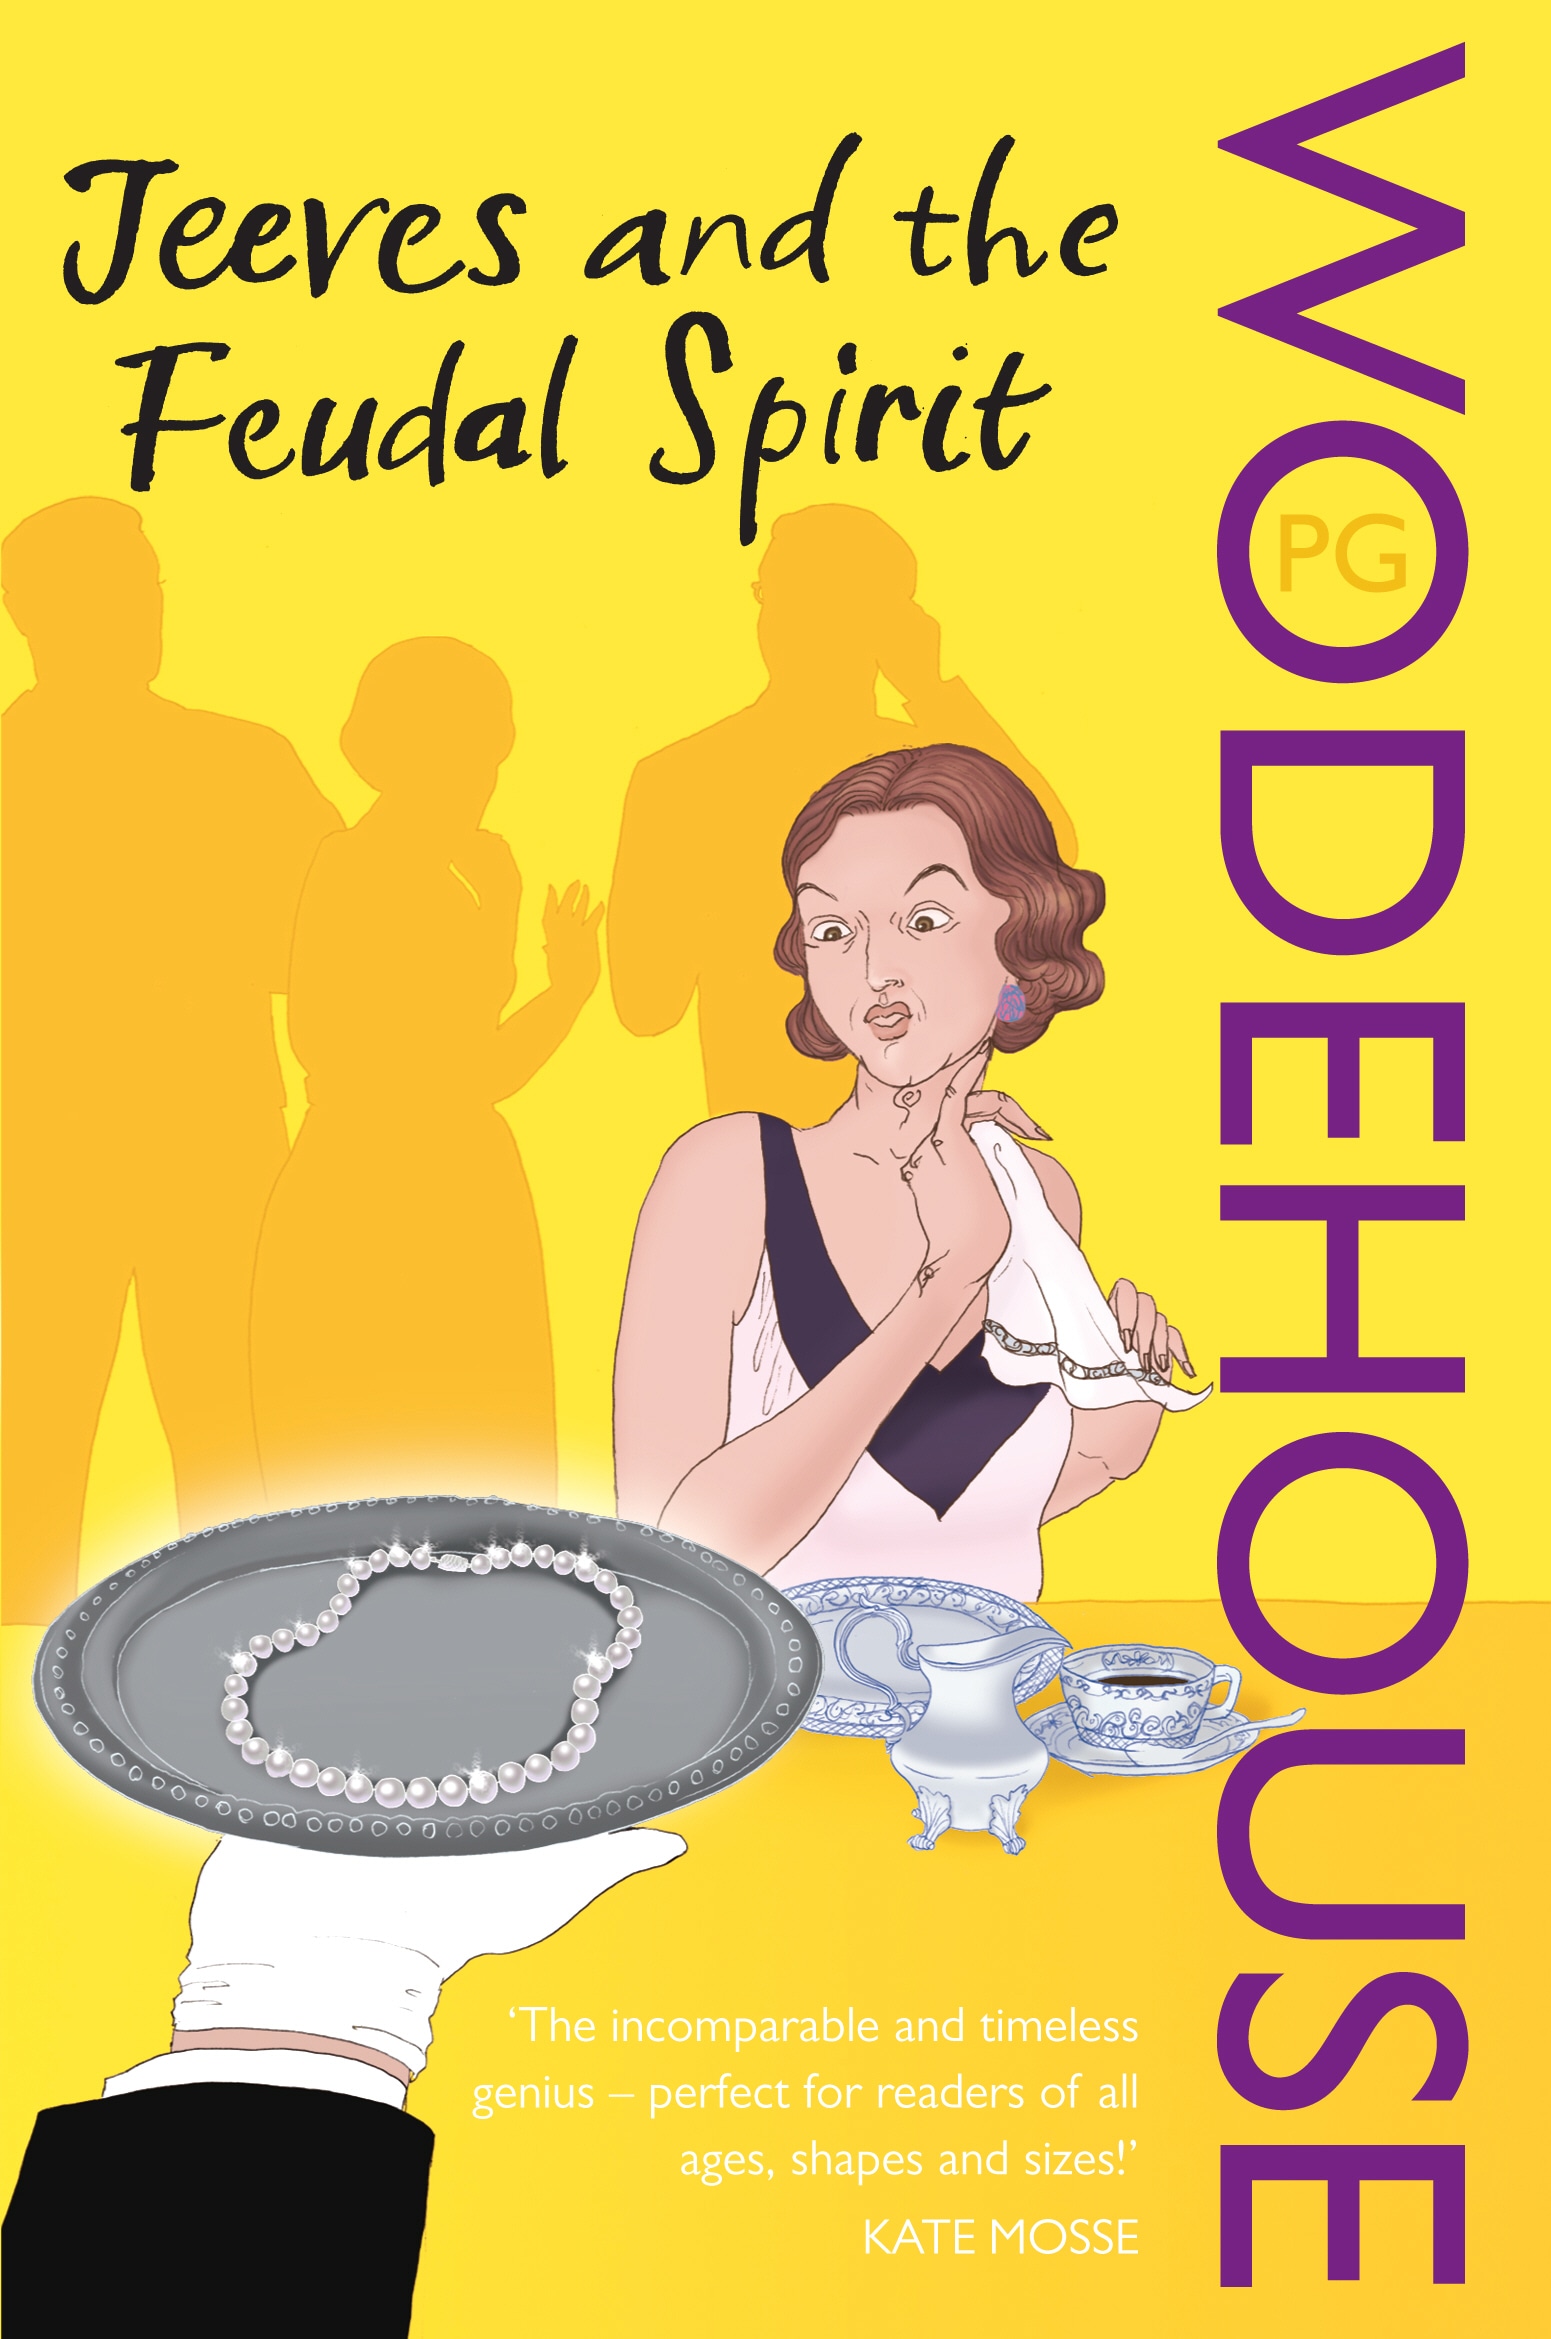 Book “Jeeves and the Feudal Spirit” by P.G. Wodehouse — August 7, 2008